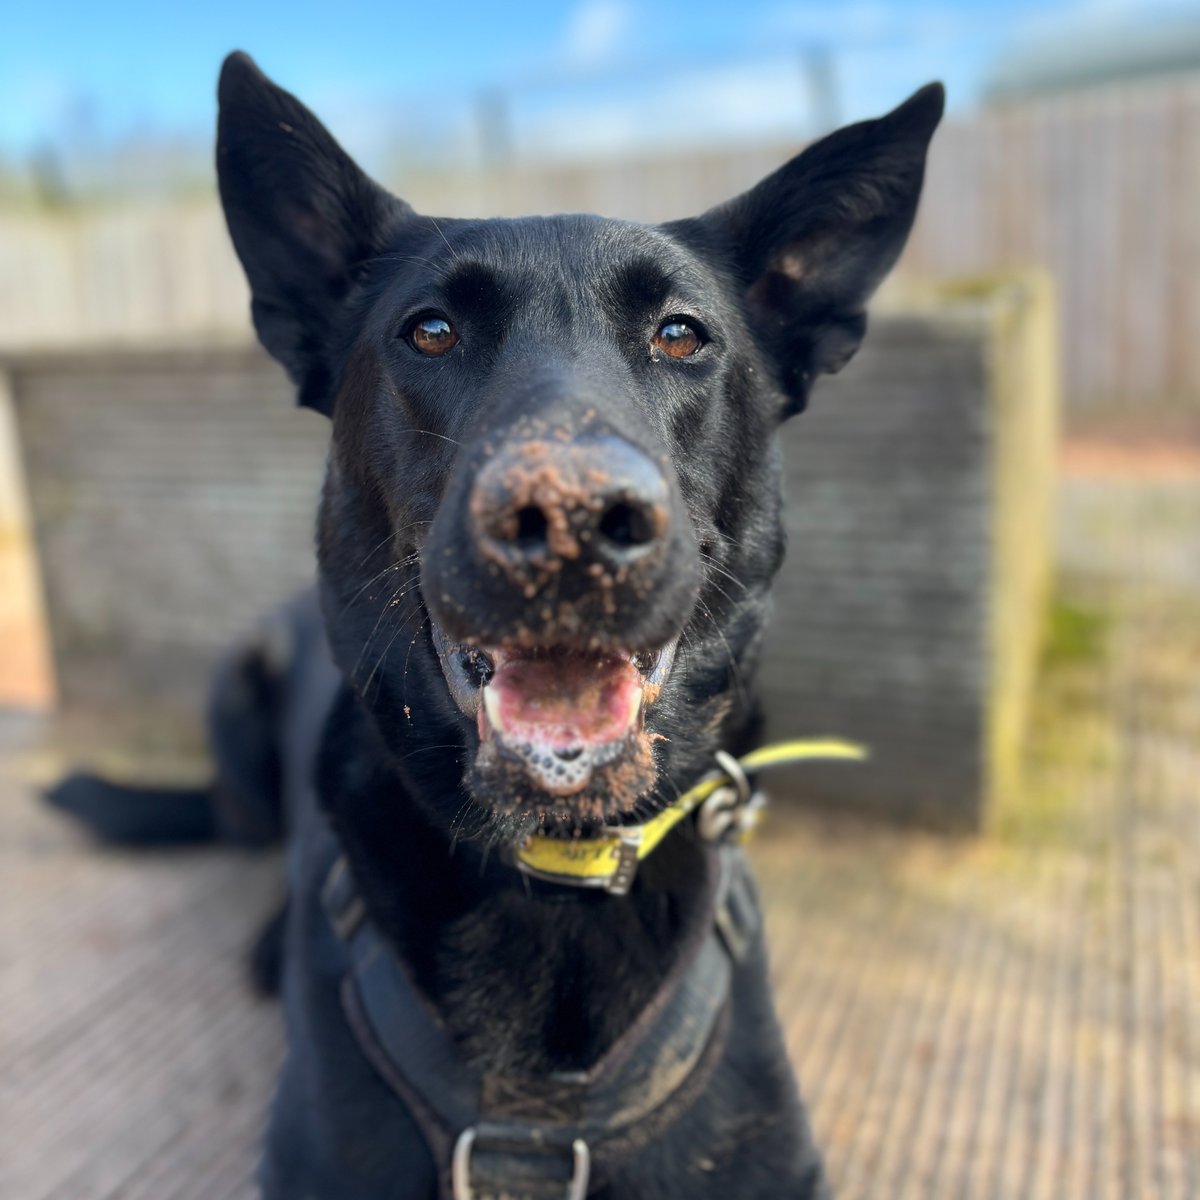 A big BOOP from our boy Nyx! Find out more 👇 dogstrust.org.uk/rehoming/dogs/… #DogsTrust #AdoptDontShop #Malinois #Crossbreed